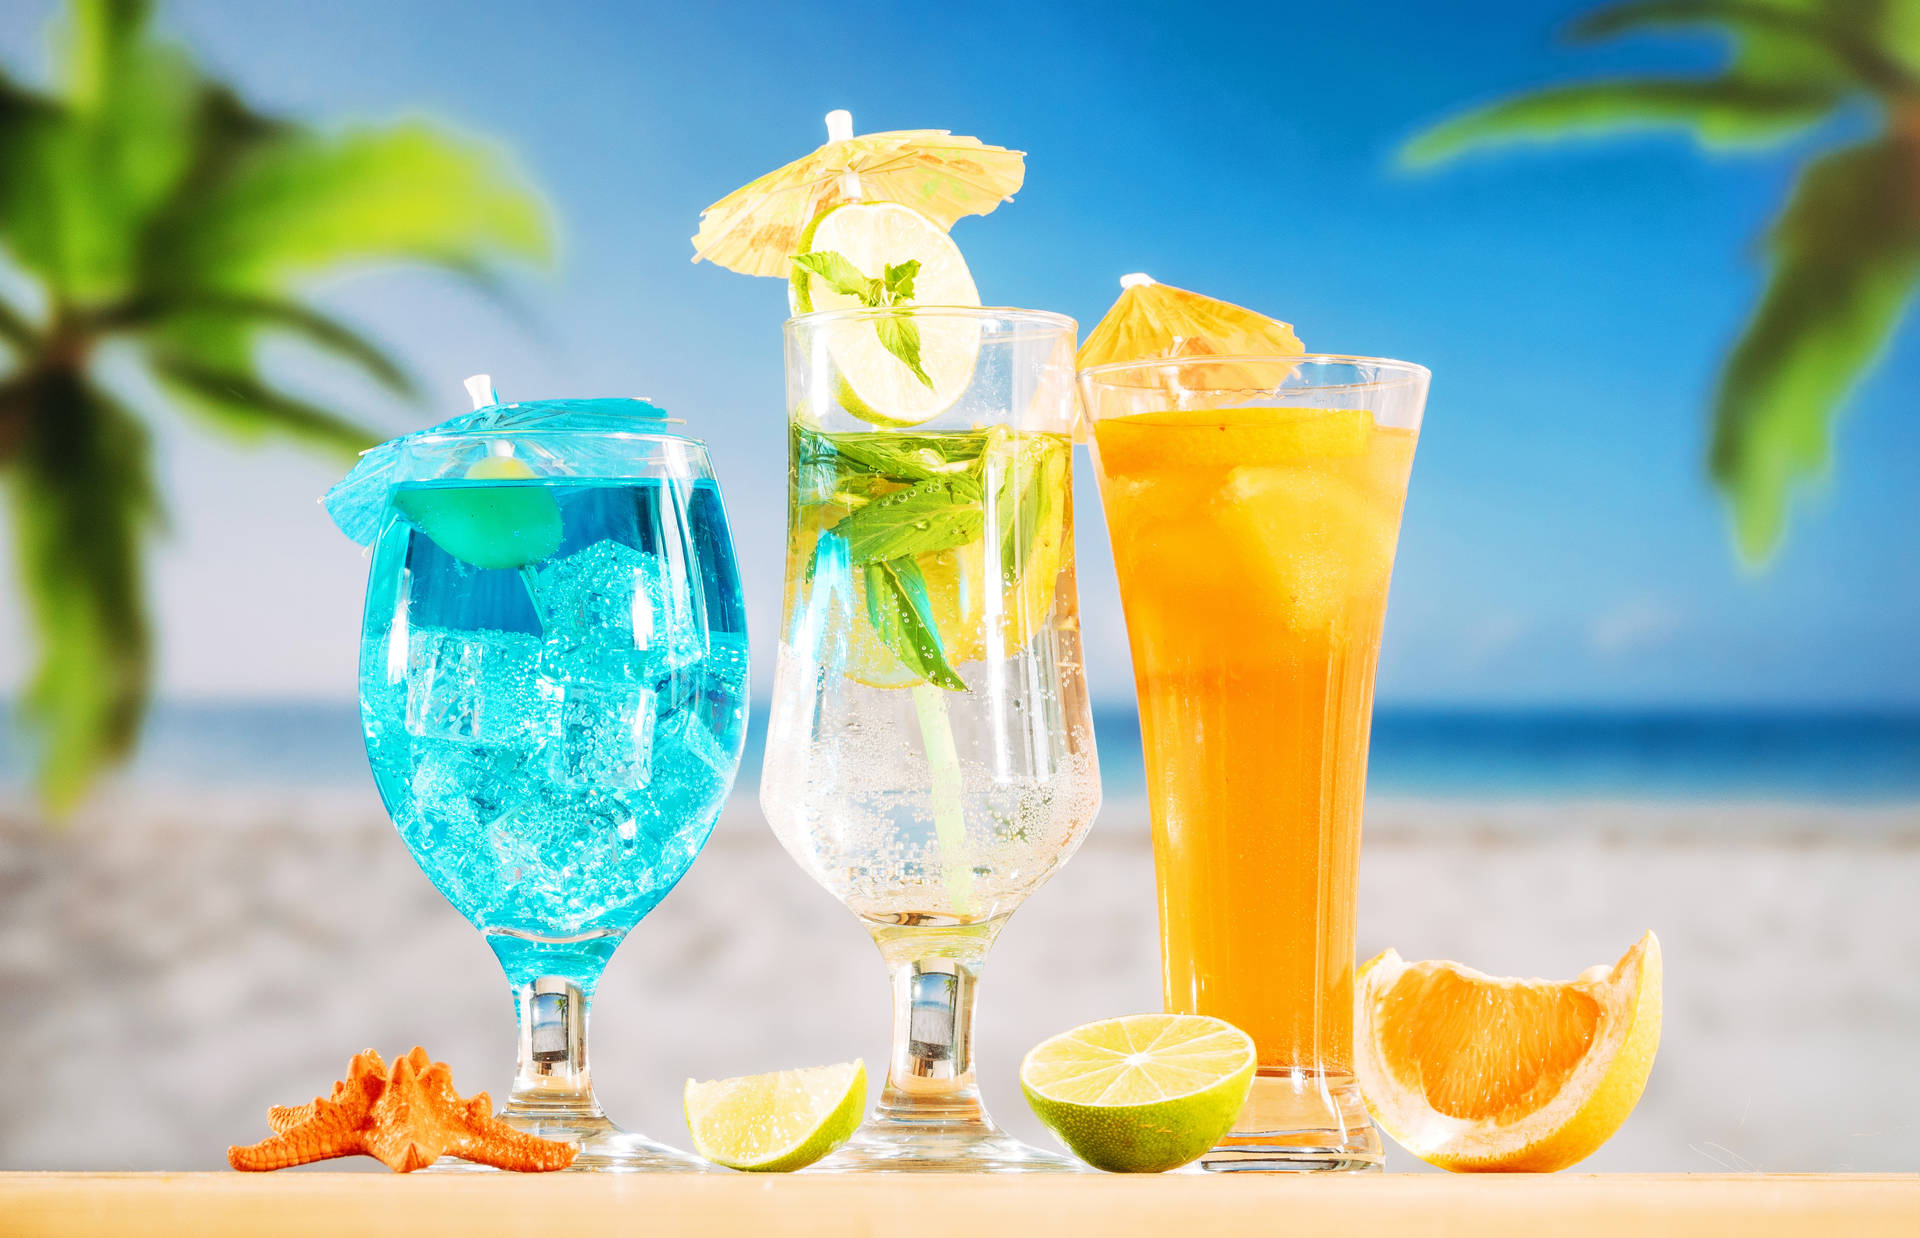 Fruity Tropical Drinks Background